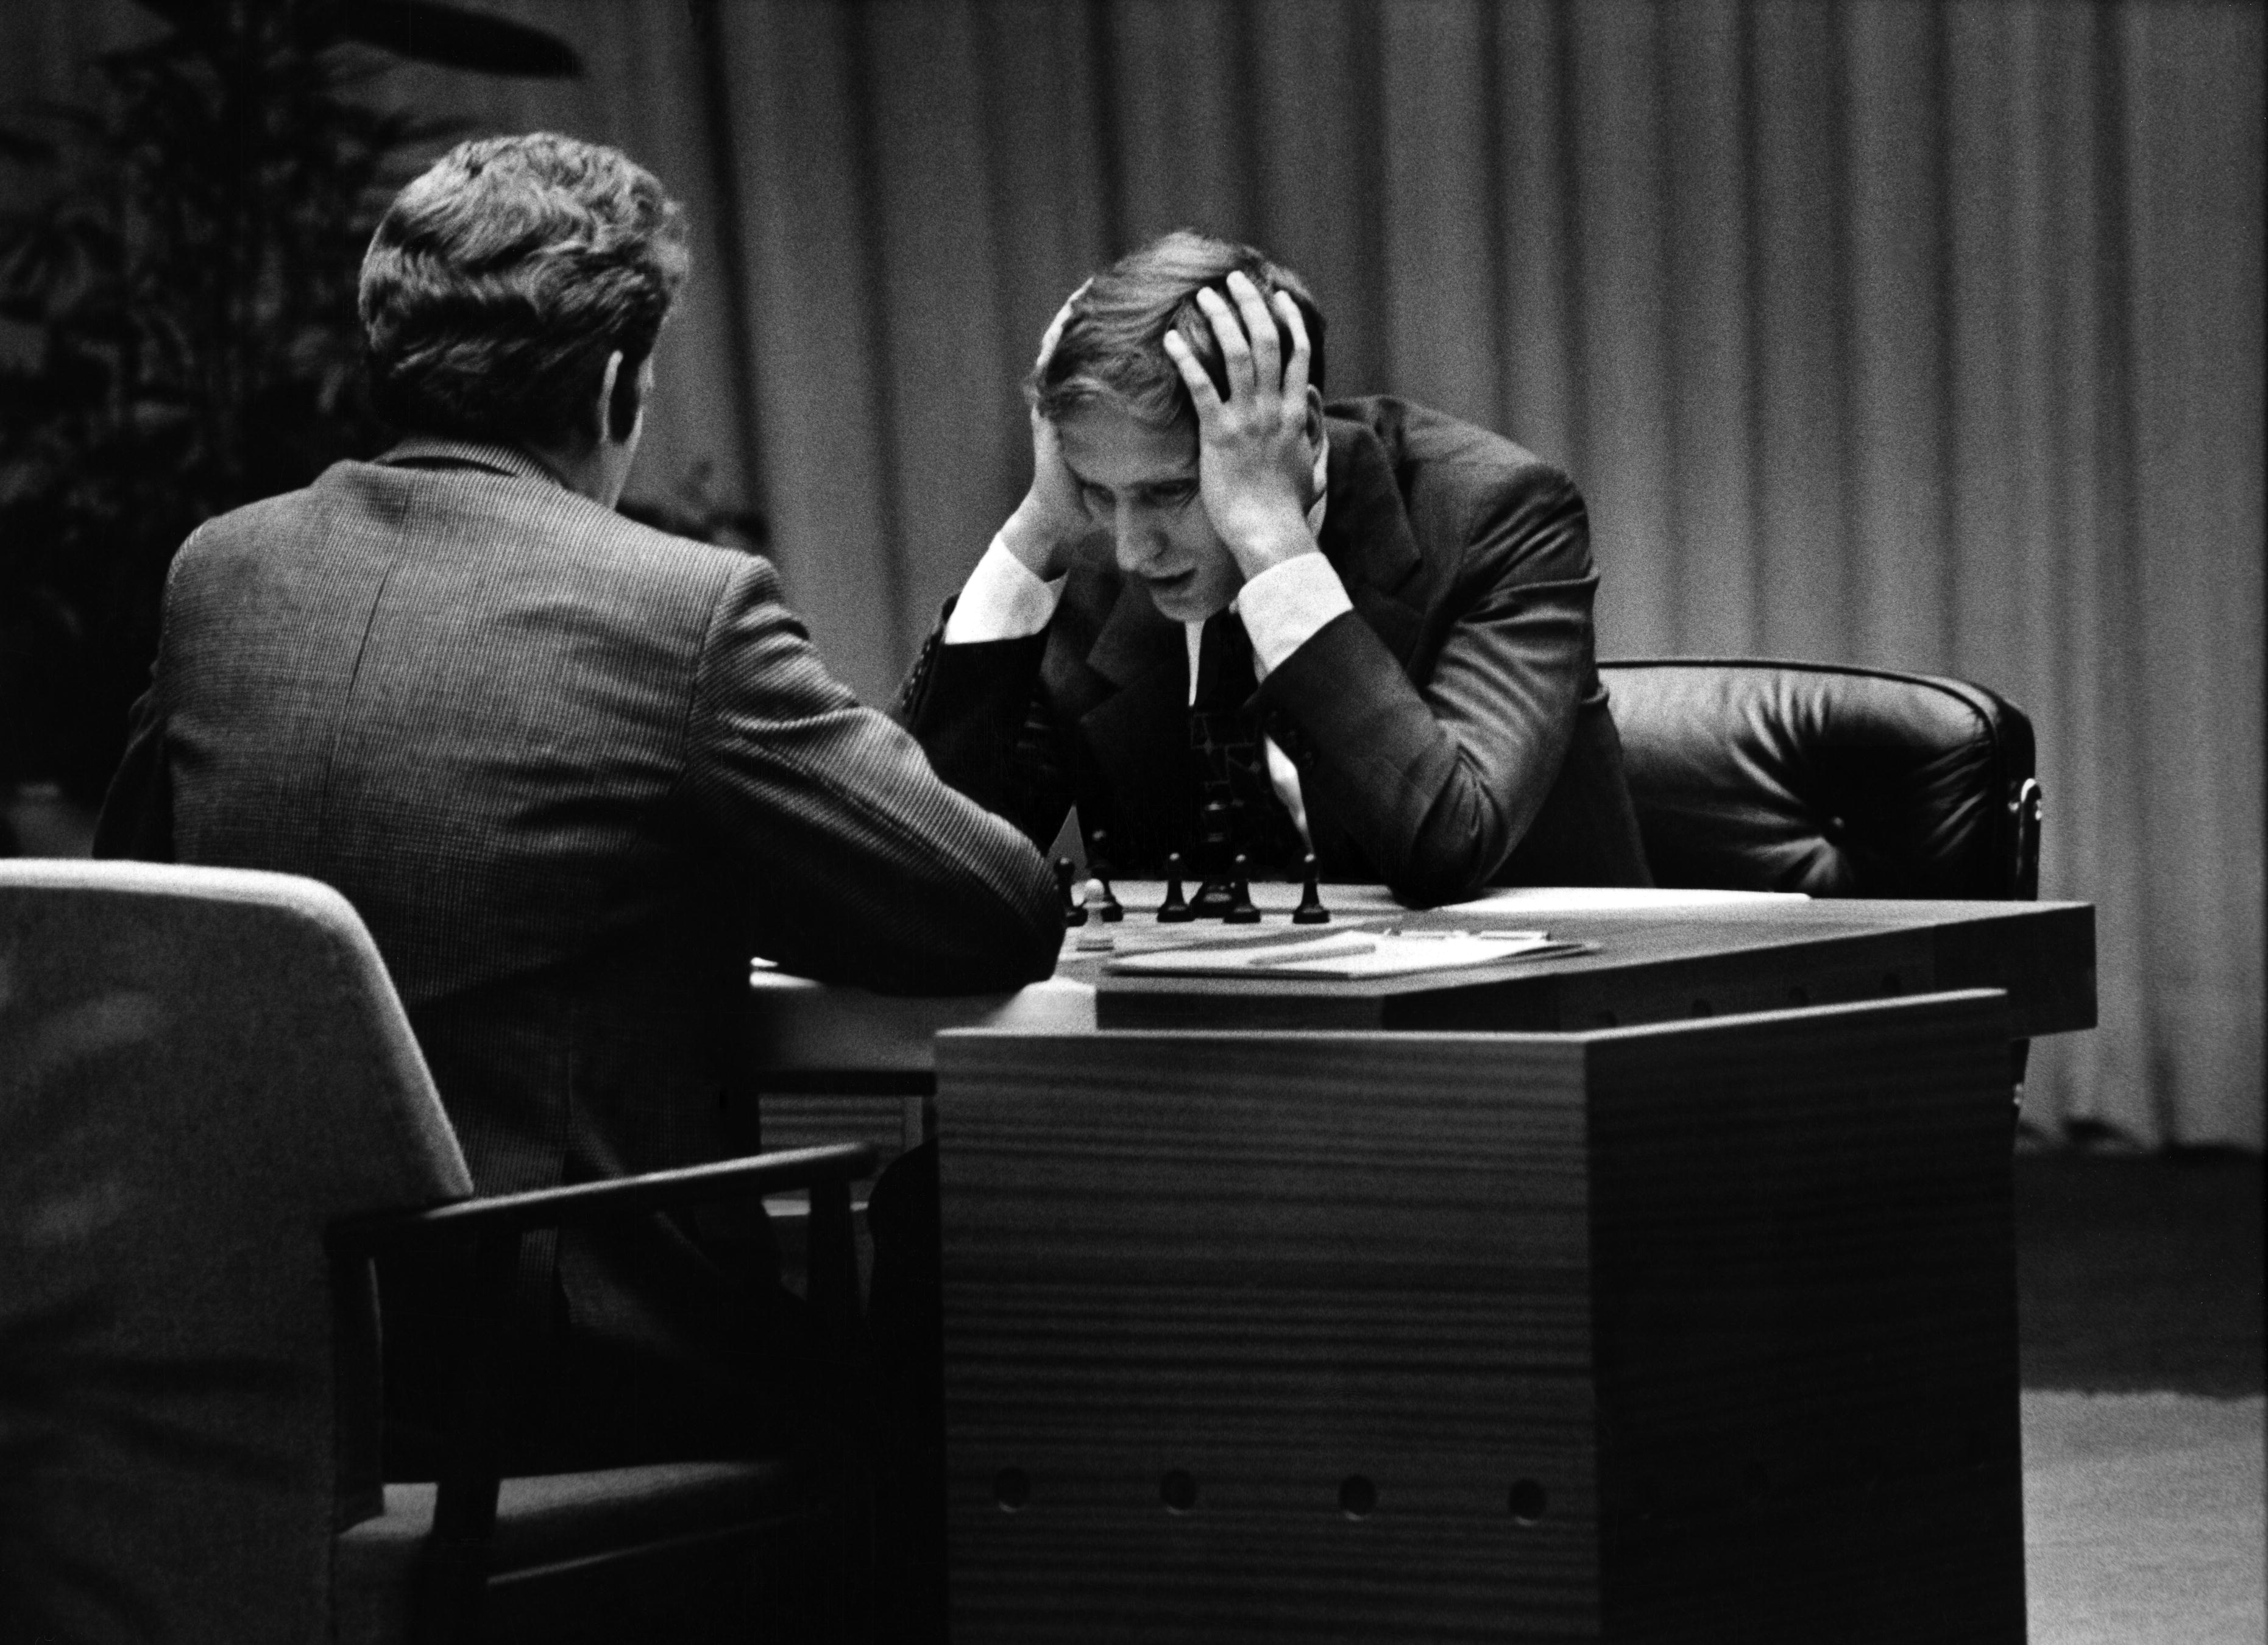 Bobby Fischer's Greatest Moves - Tablet Magazine